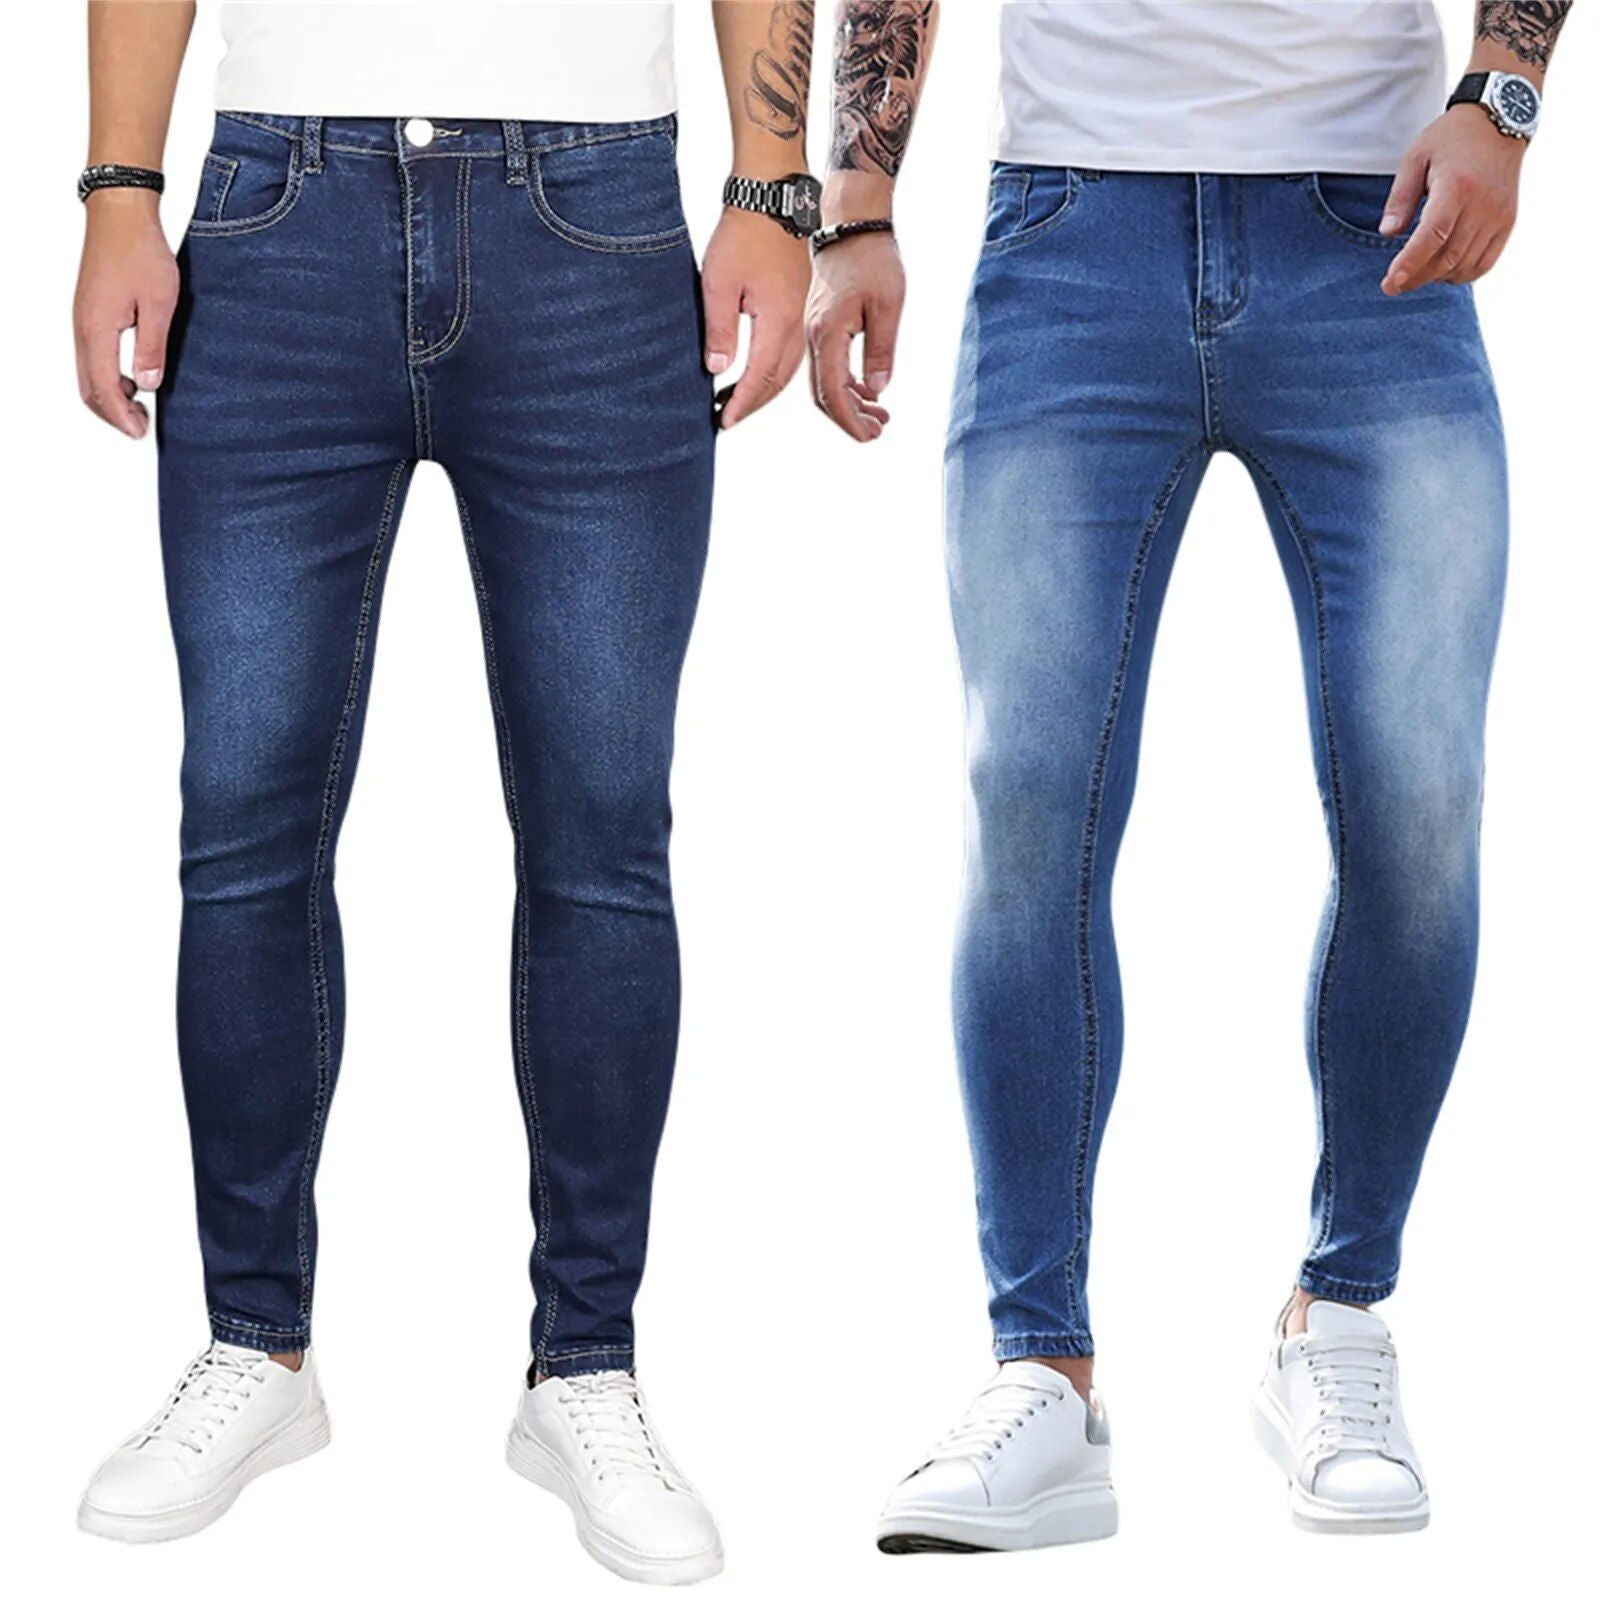 Men's casual skinny slim fit stretch jeans in blue with pockets